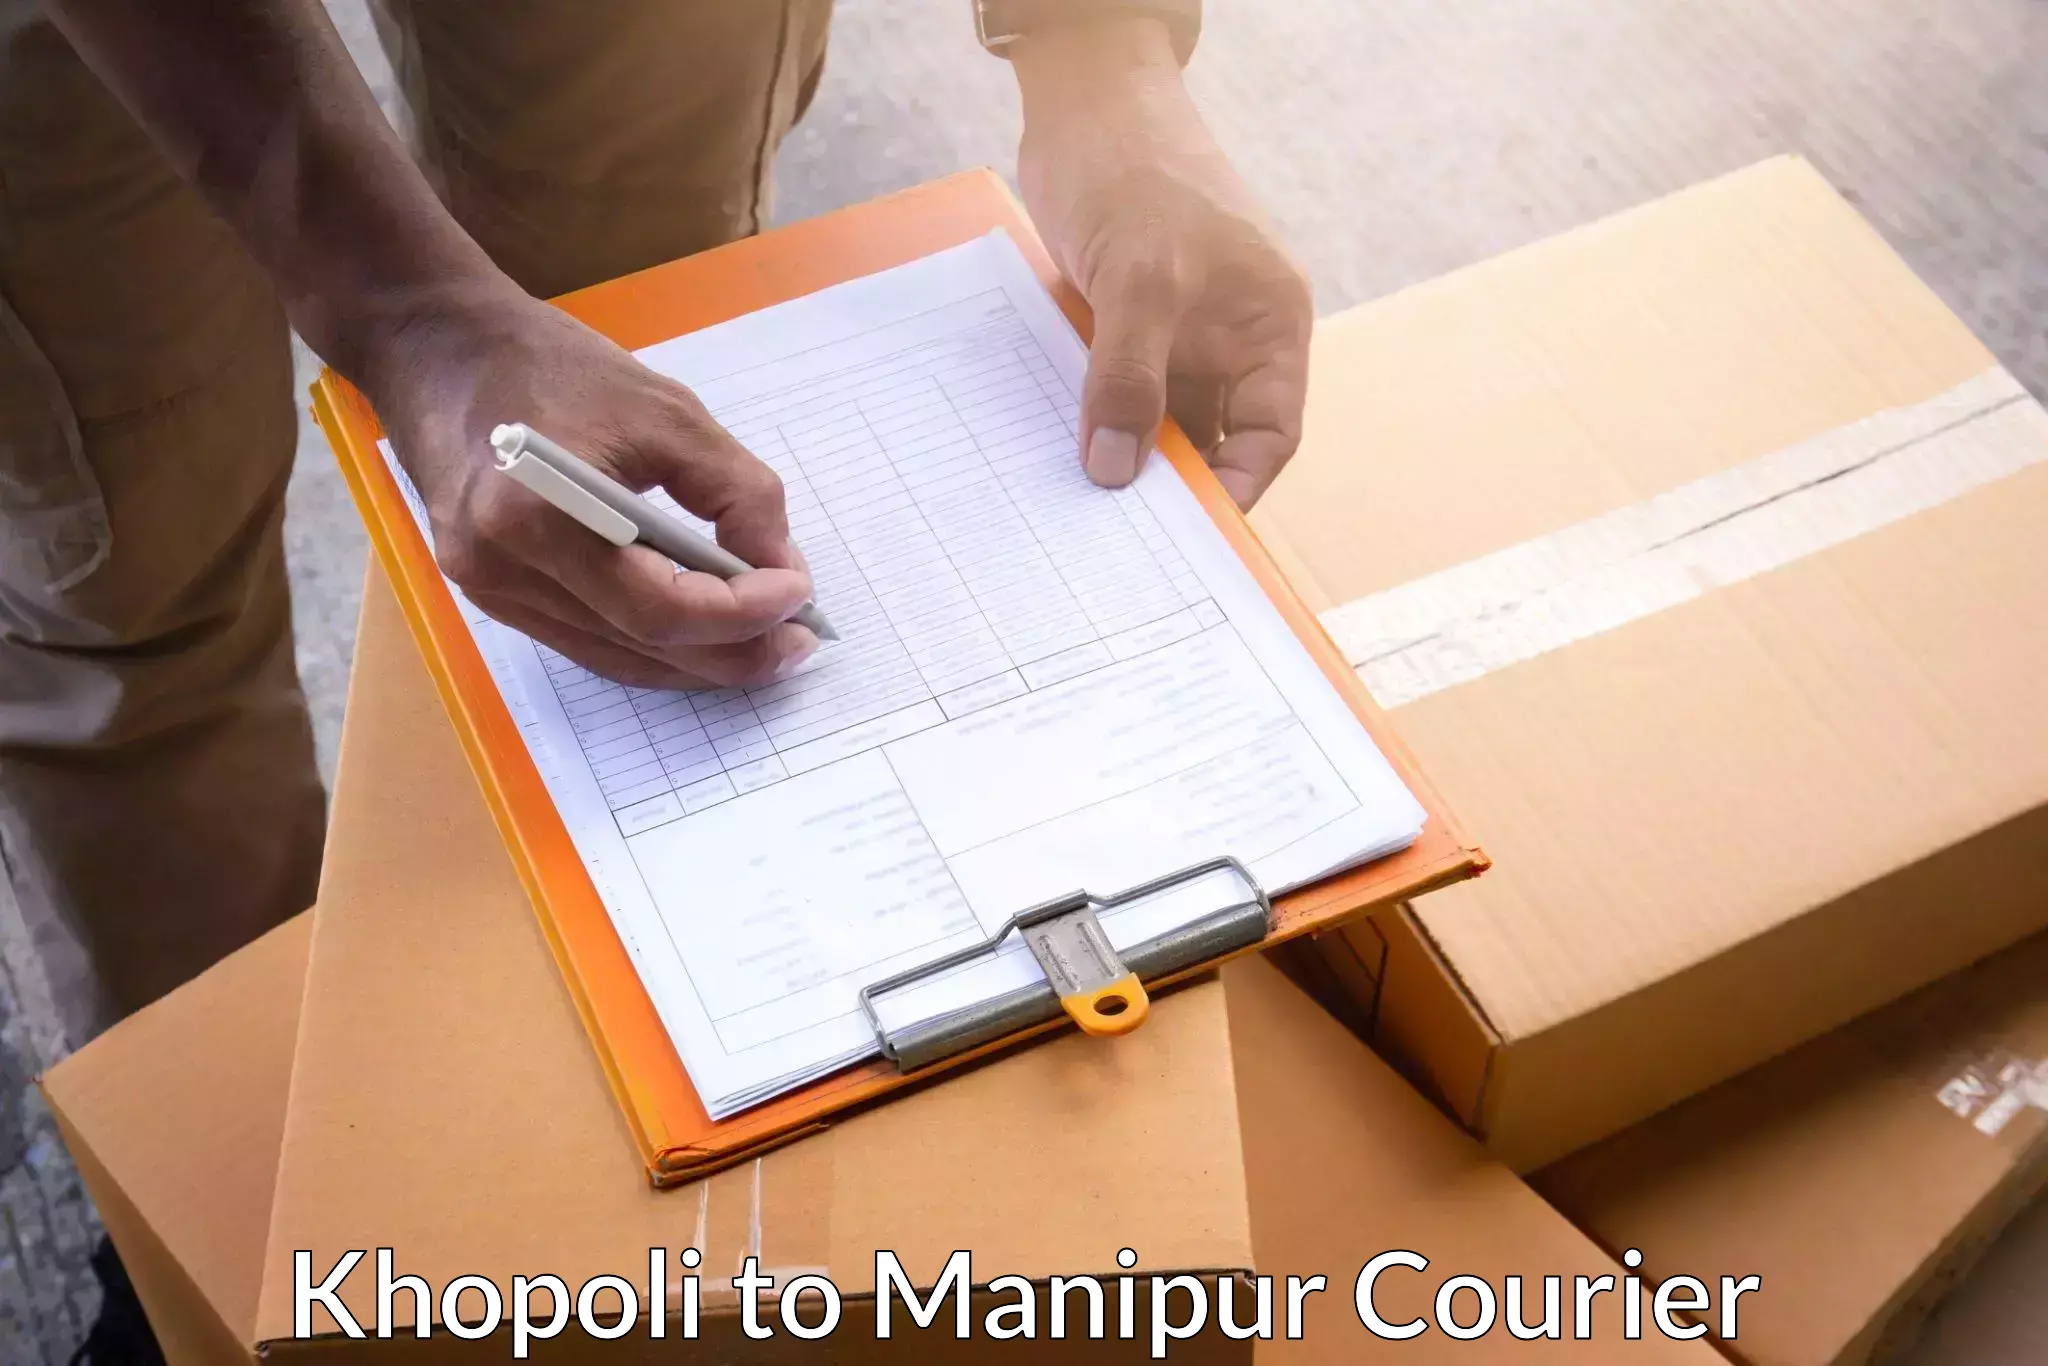 Full-service courier options Khopoli to Manipur